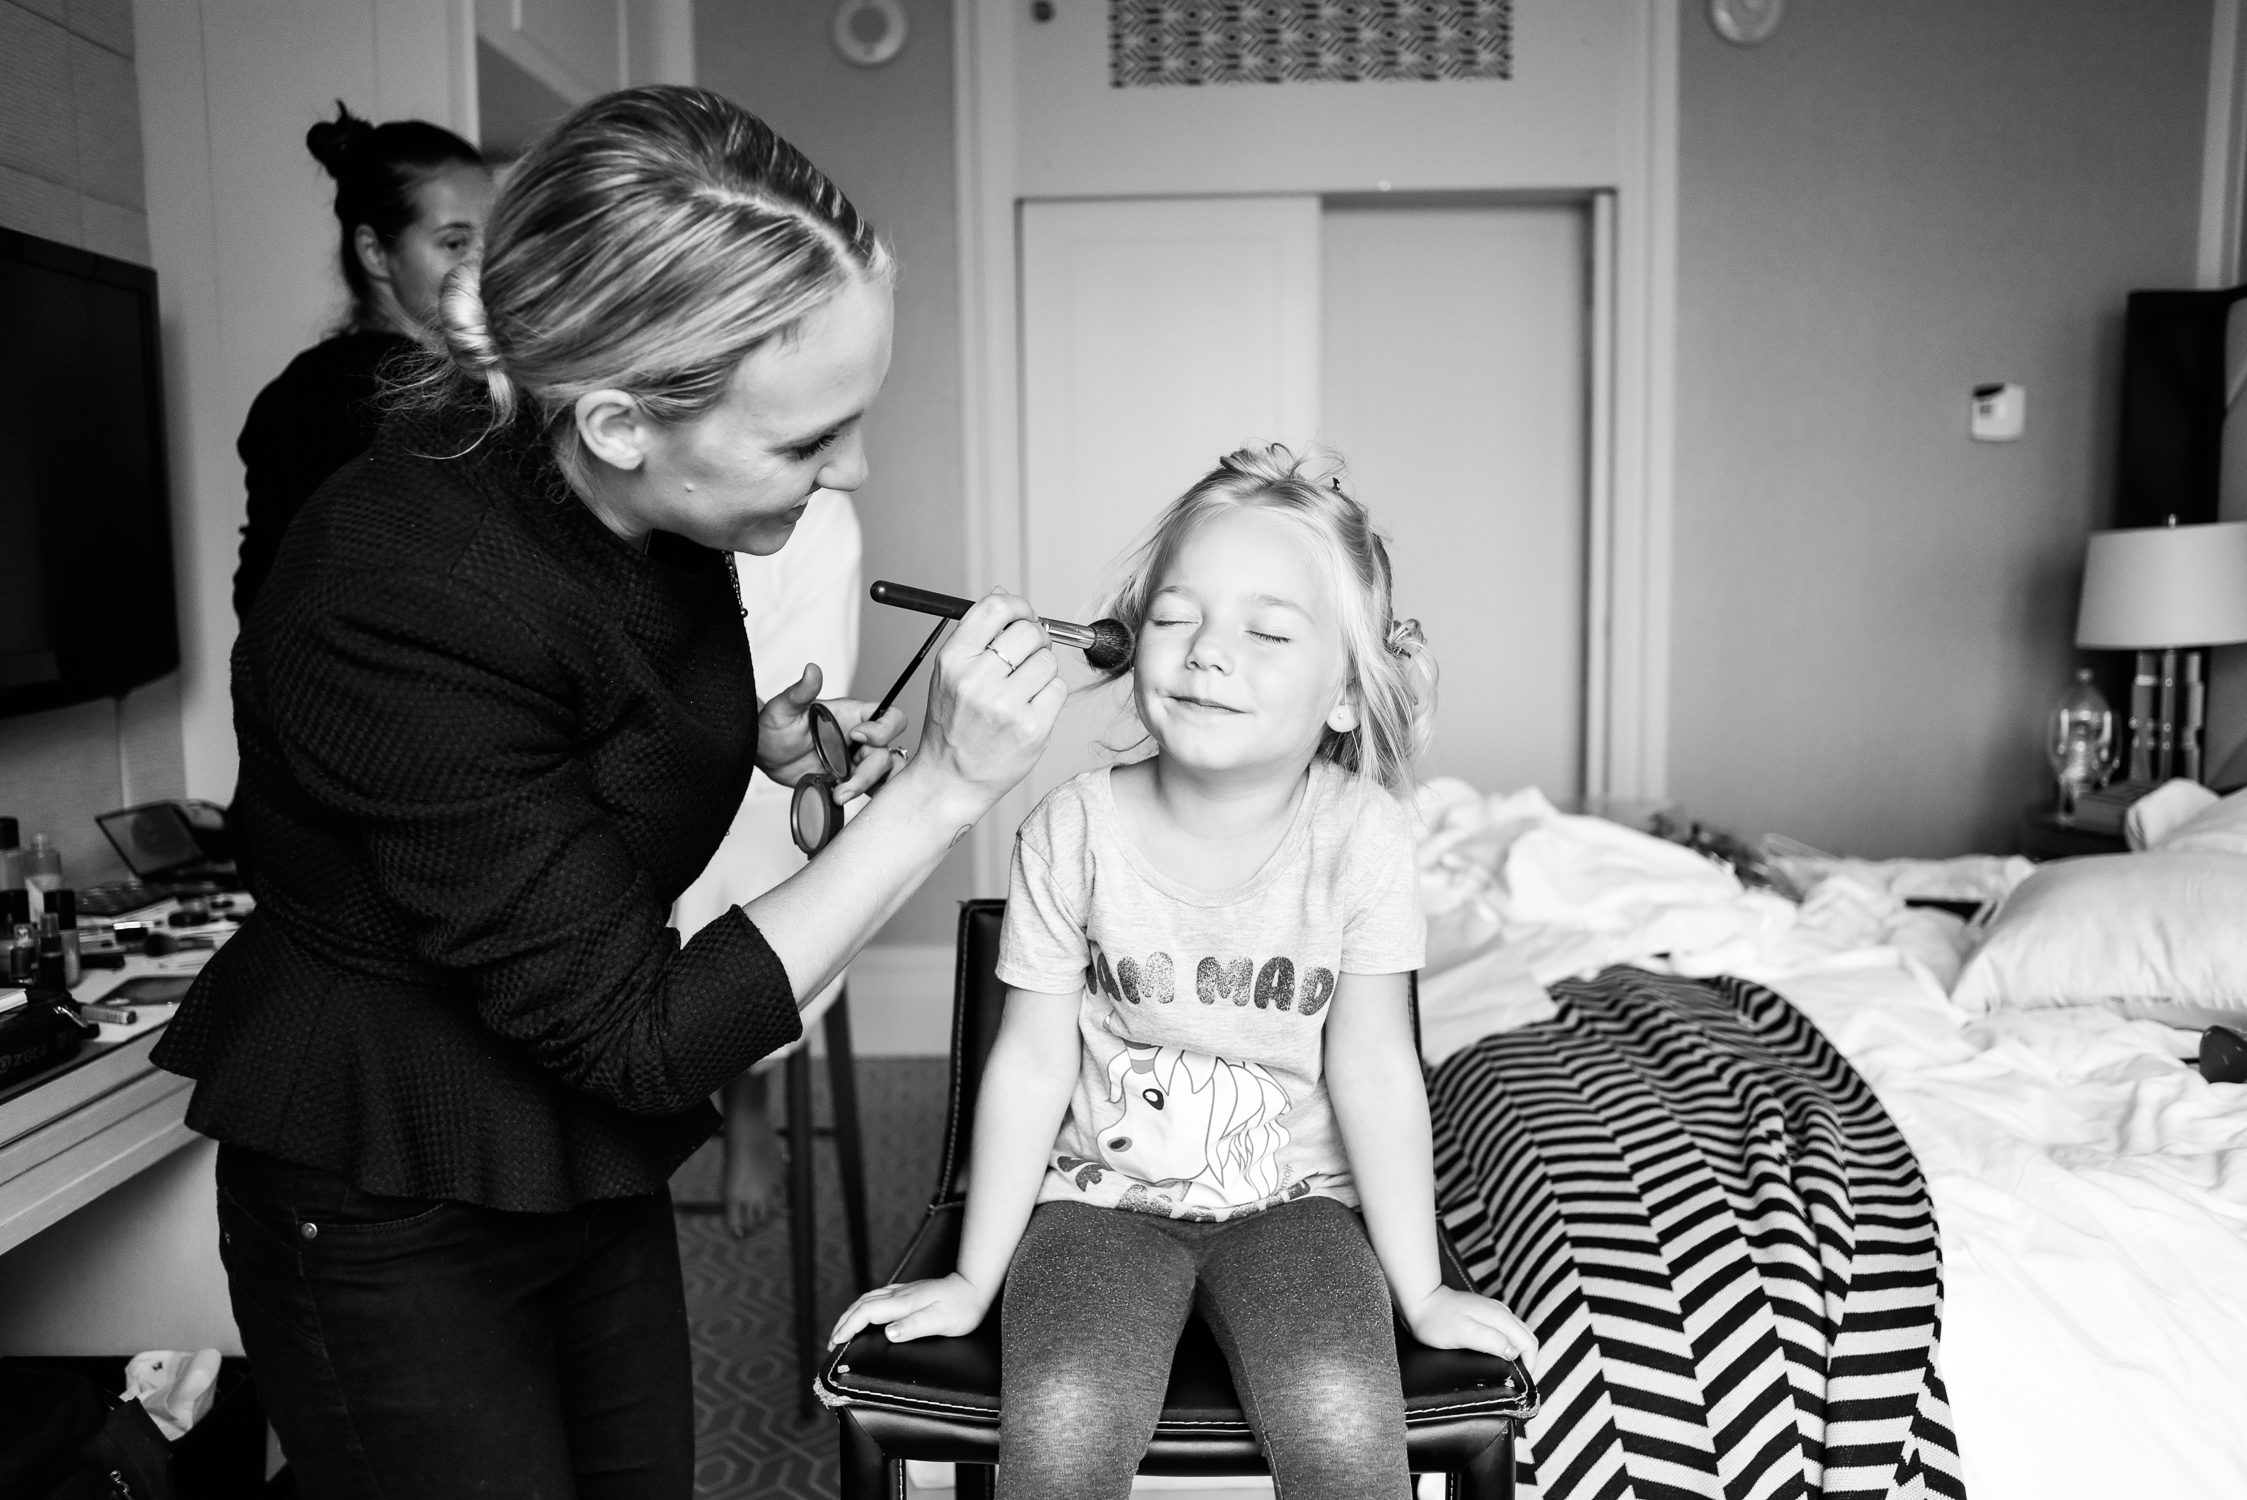 Little girl getting makeup done